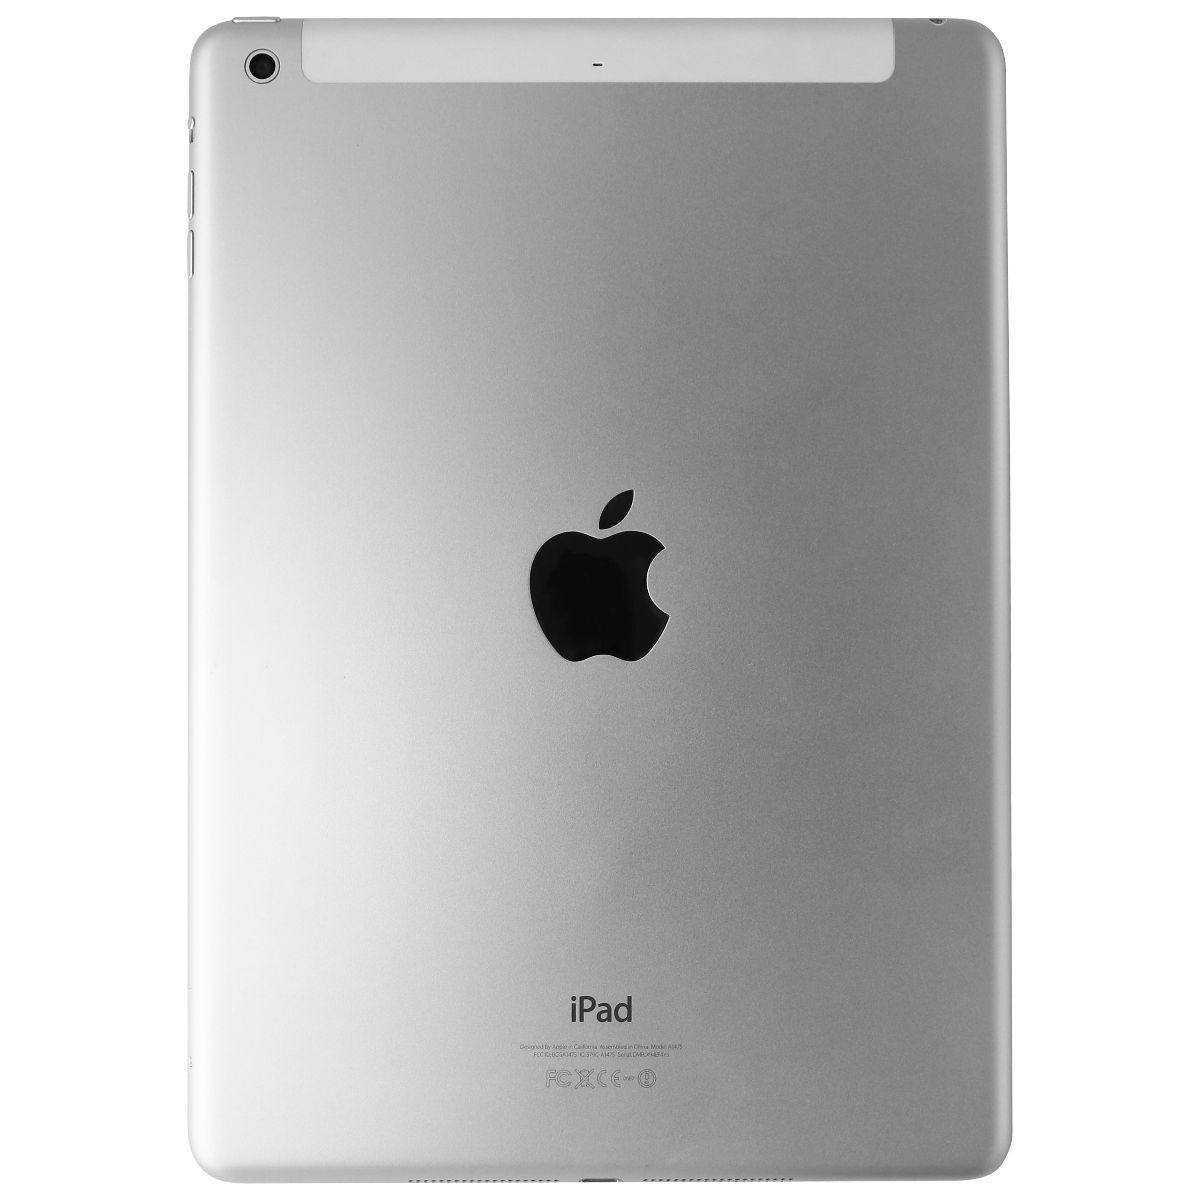 Apple iPad Air (1st Gen) 9.7-inch Tablet (A1475) Unlocked - 32GB / Silver iPads, Tablets & eBook Readers Apple    - Simple Cell Bulk Wholesale Pricing - USA Seller